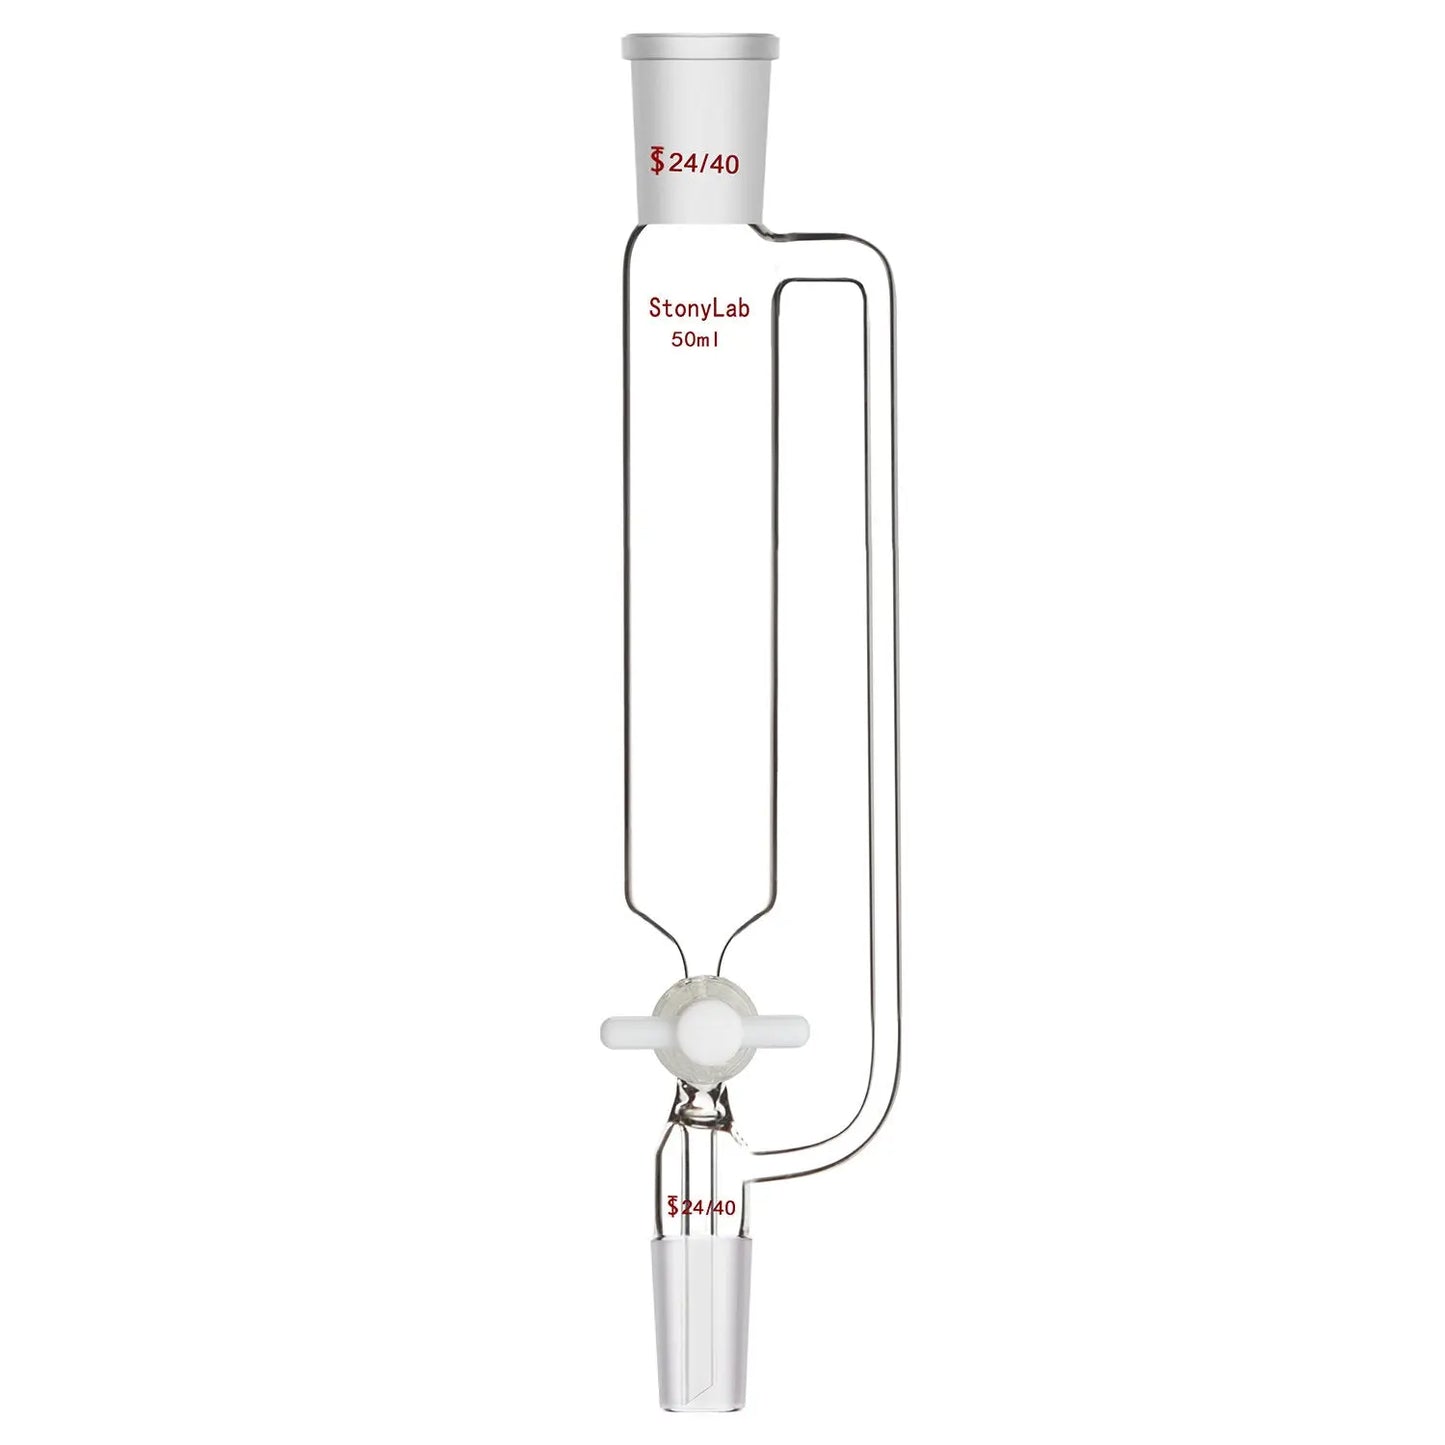 Pressure Equalizing Addition Funnel, 24/40, PTFE Stopcock, 50-500 ml - StonyLab Funnels - Glass/Powder/Weighing/Equalizing 50-ml